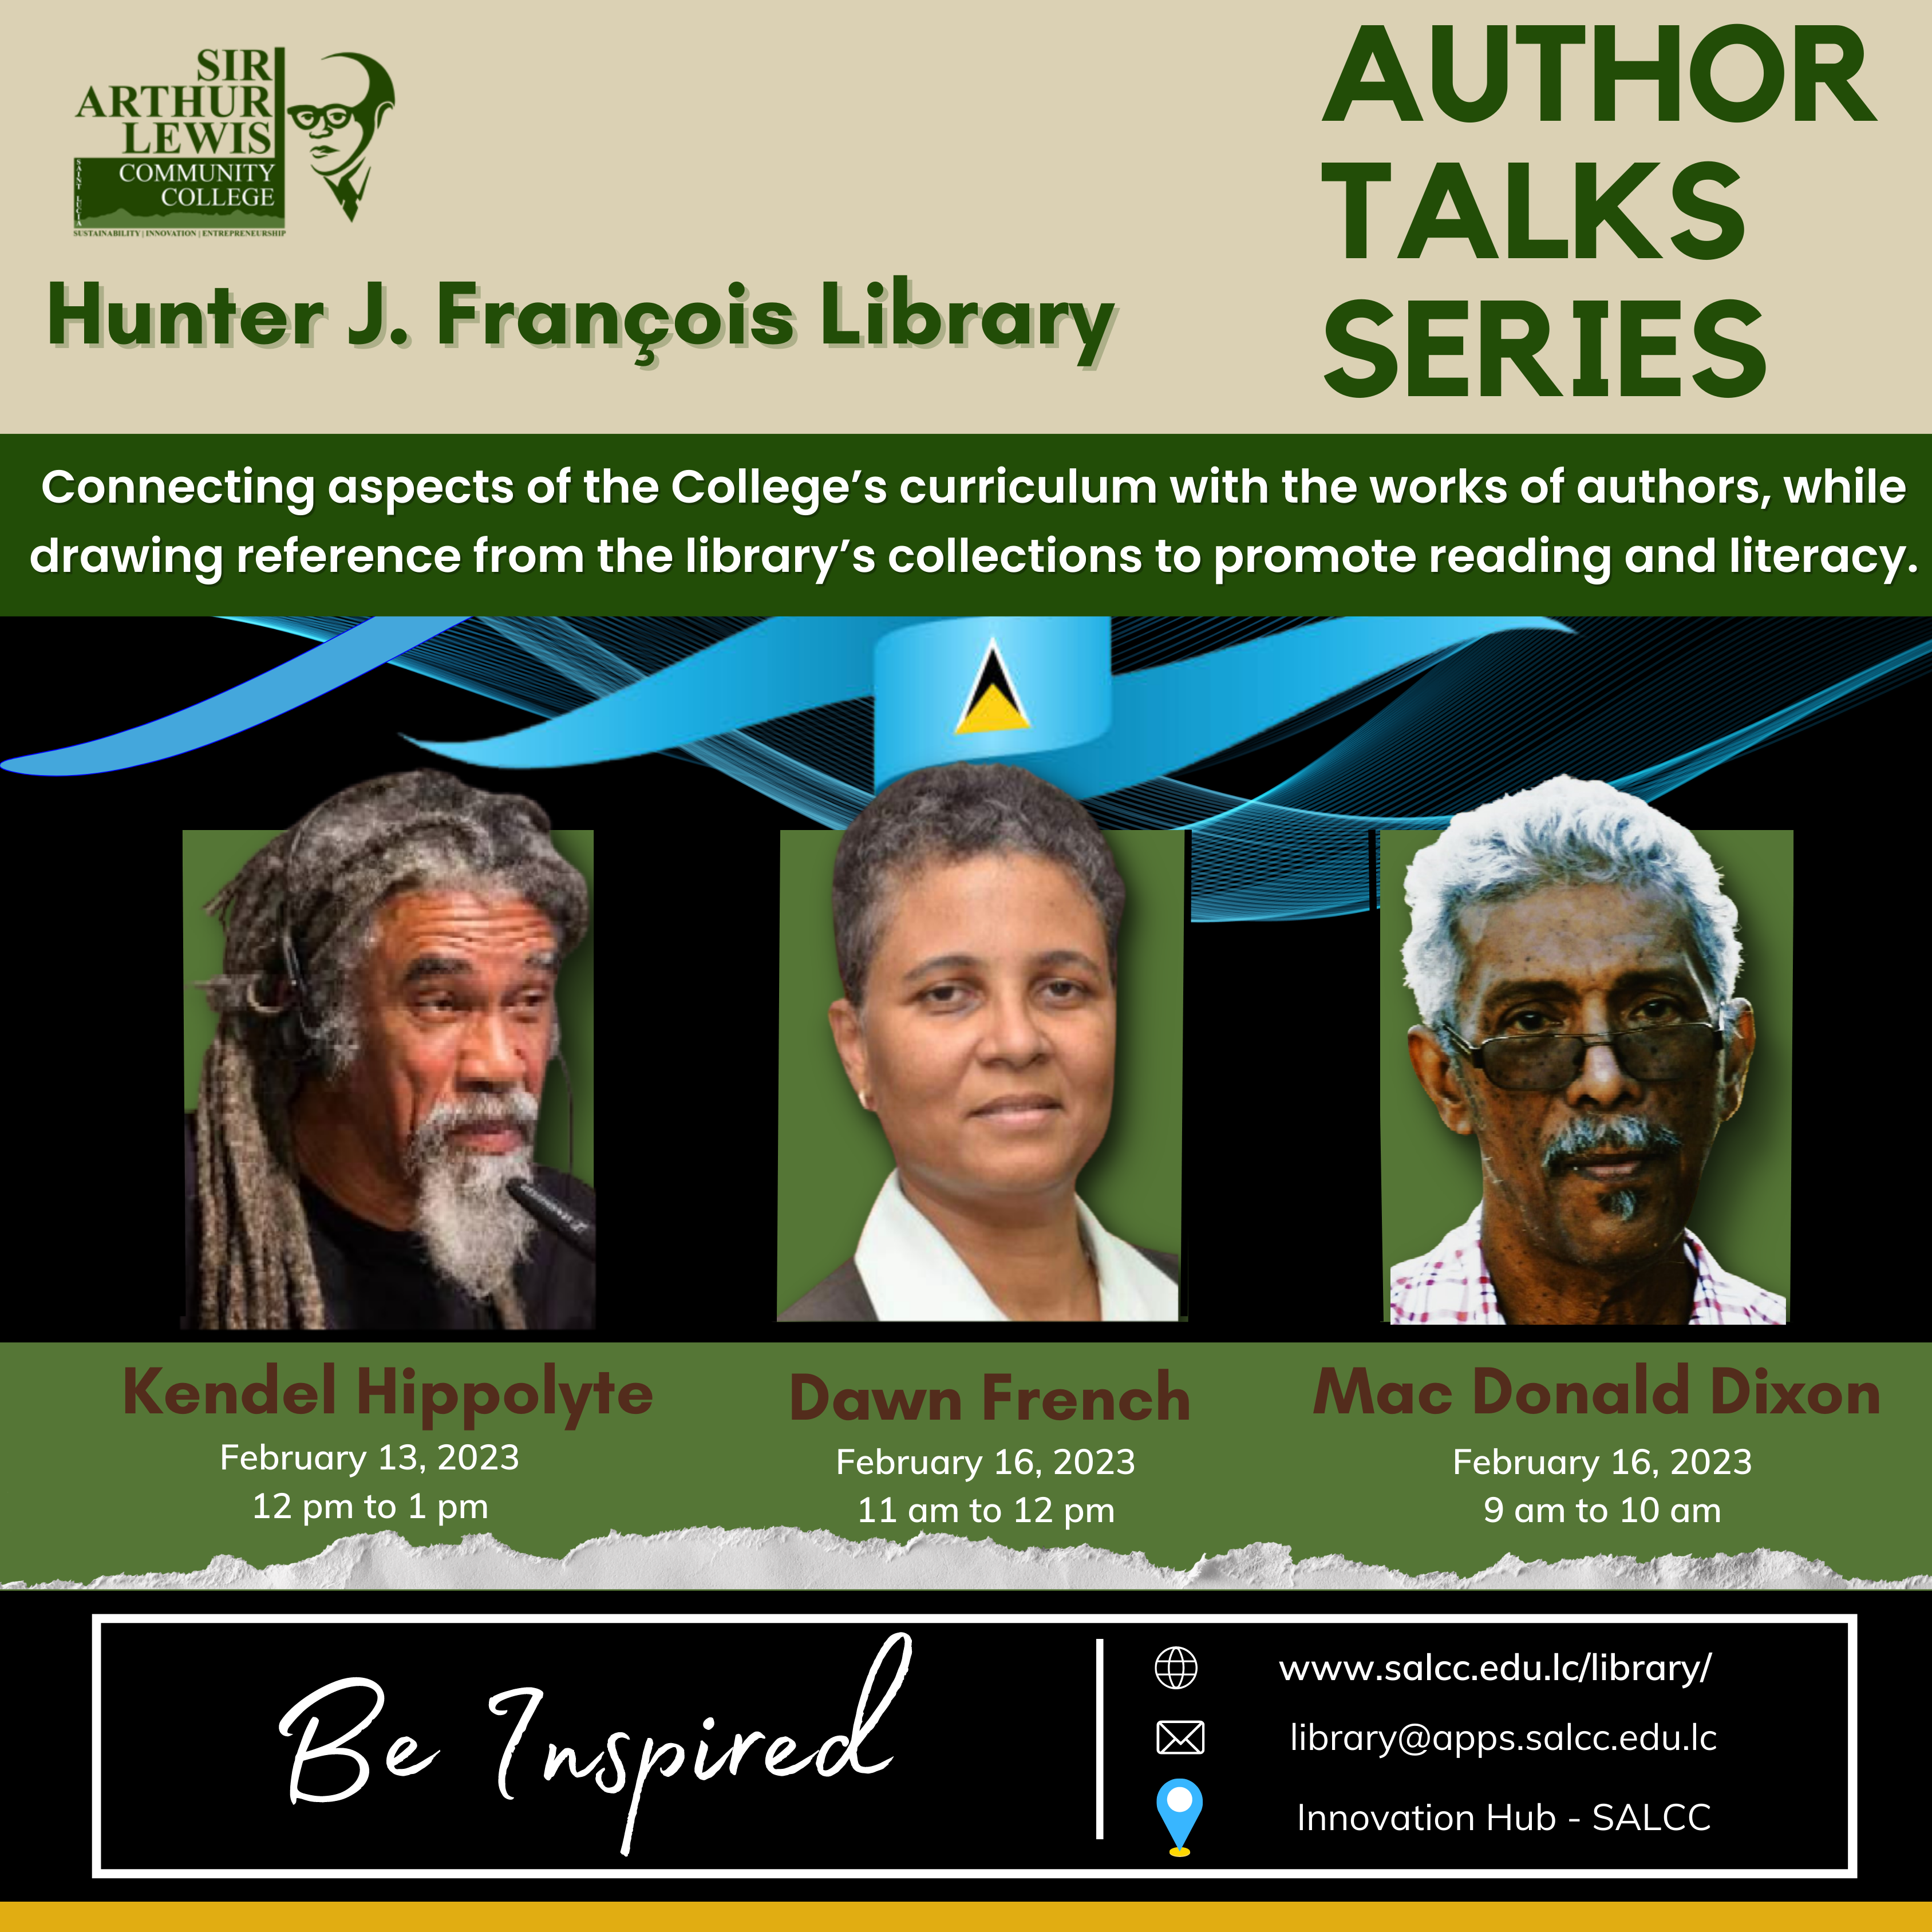 The Hunter J. François Library hosts the first installment of its AUTHOR TALKS series.